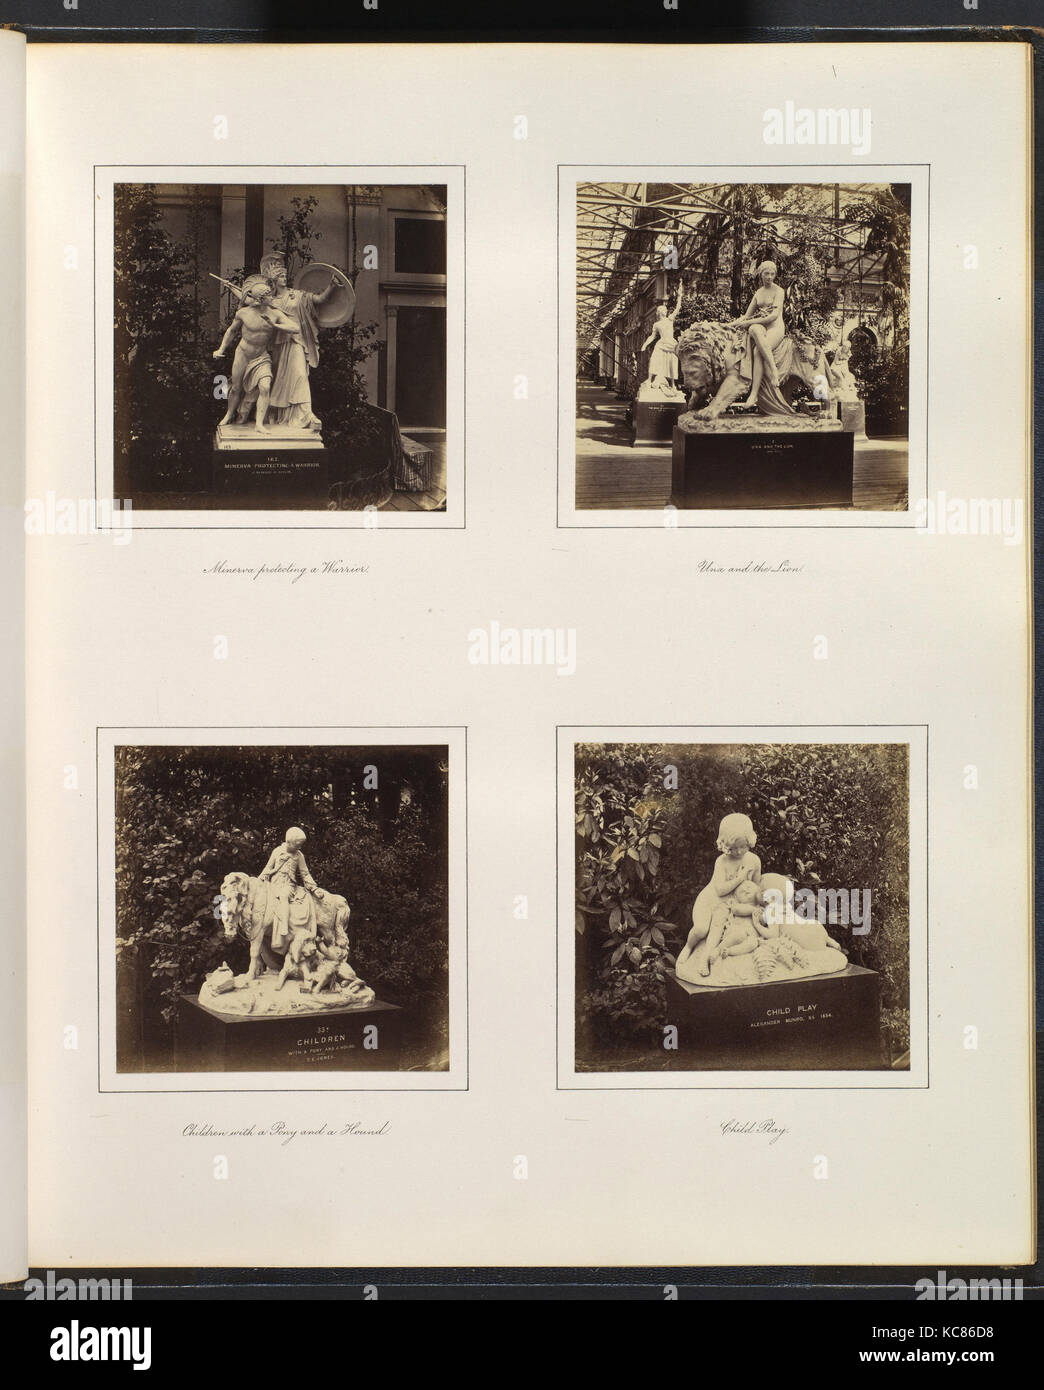 Sculptures of Minerva Protecting a Warrior, Una and the Lion, Children with a Pony and a Hound, and Child Play Stock Photo